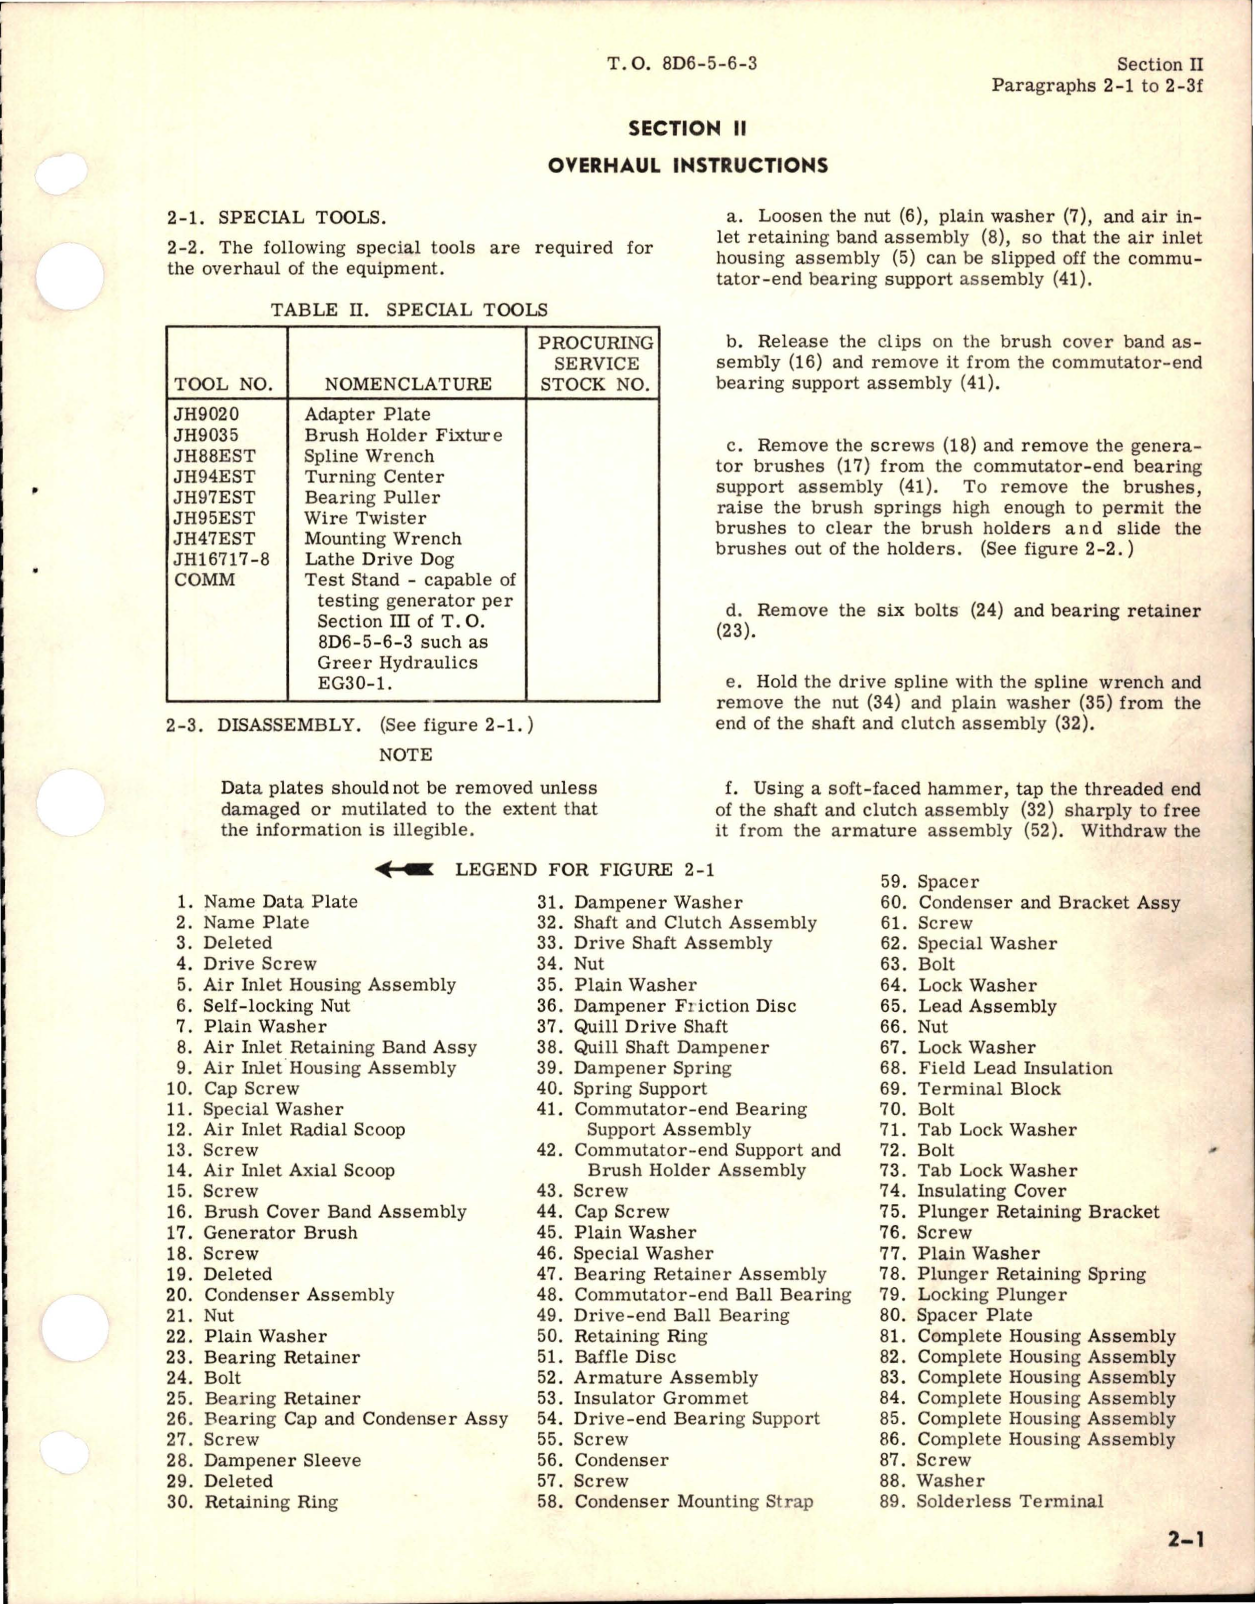 Sample page 9 from AirCorps Library document: Overhaul Manual for Generator 